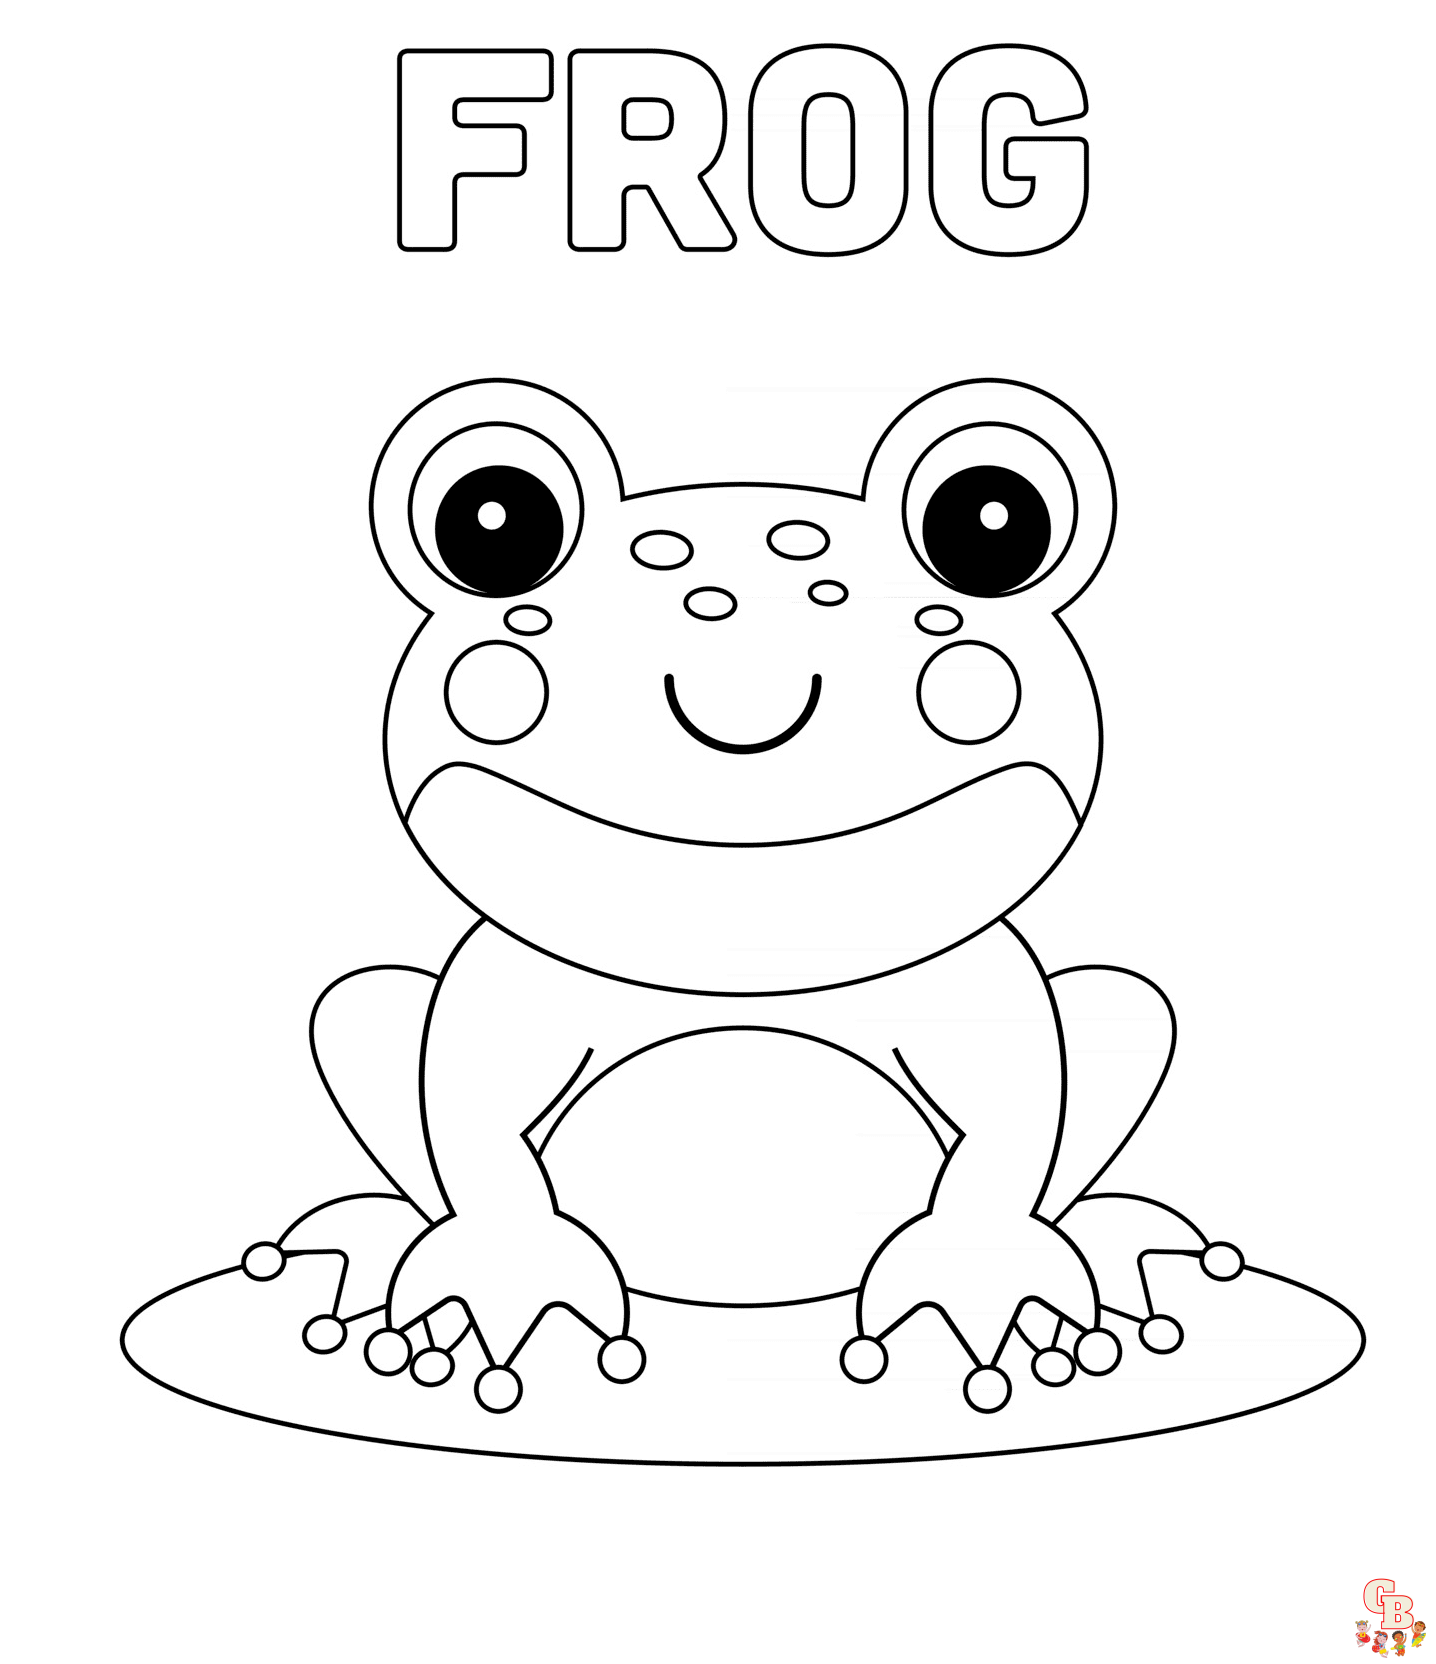 Coloriage Grenouille